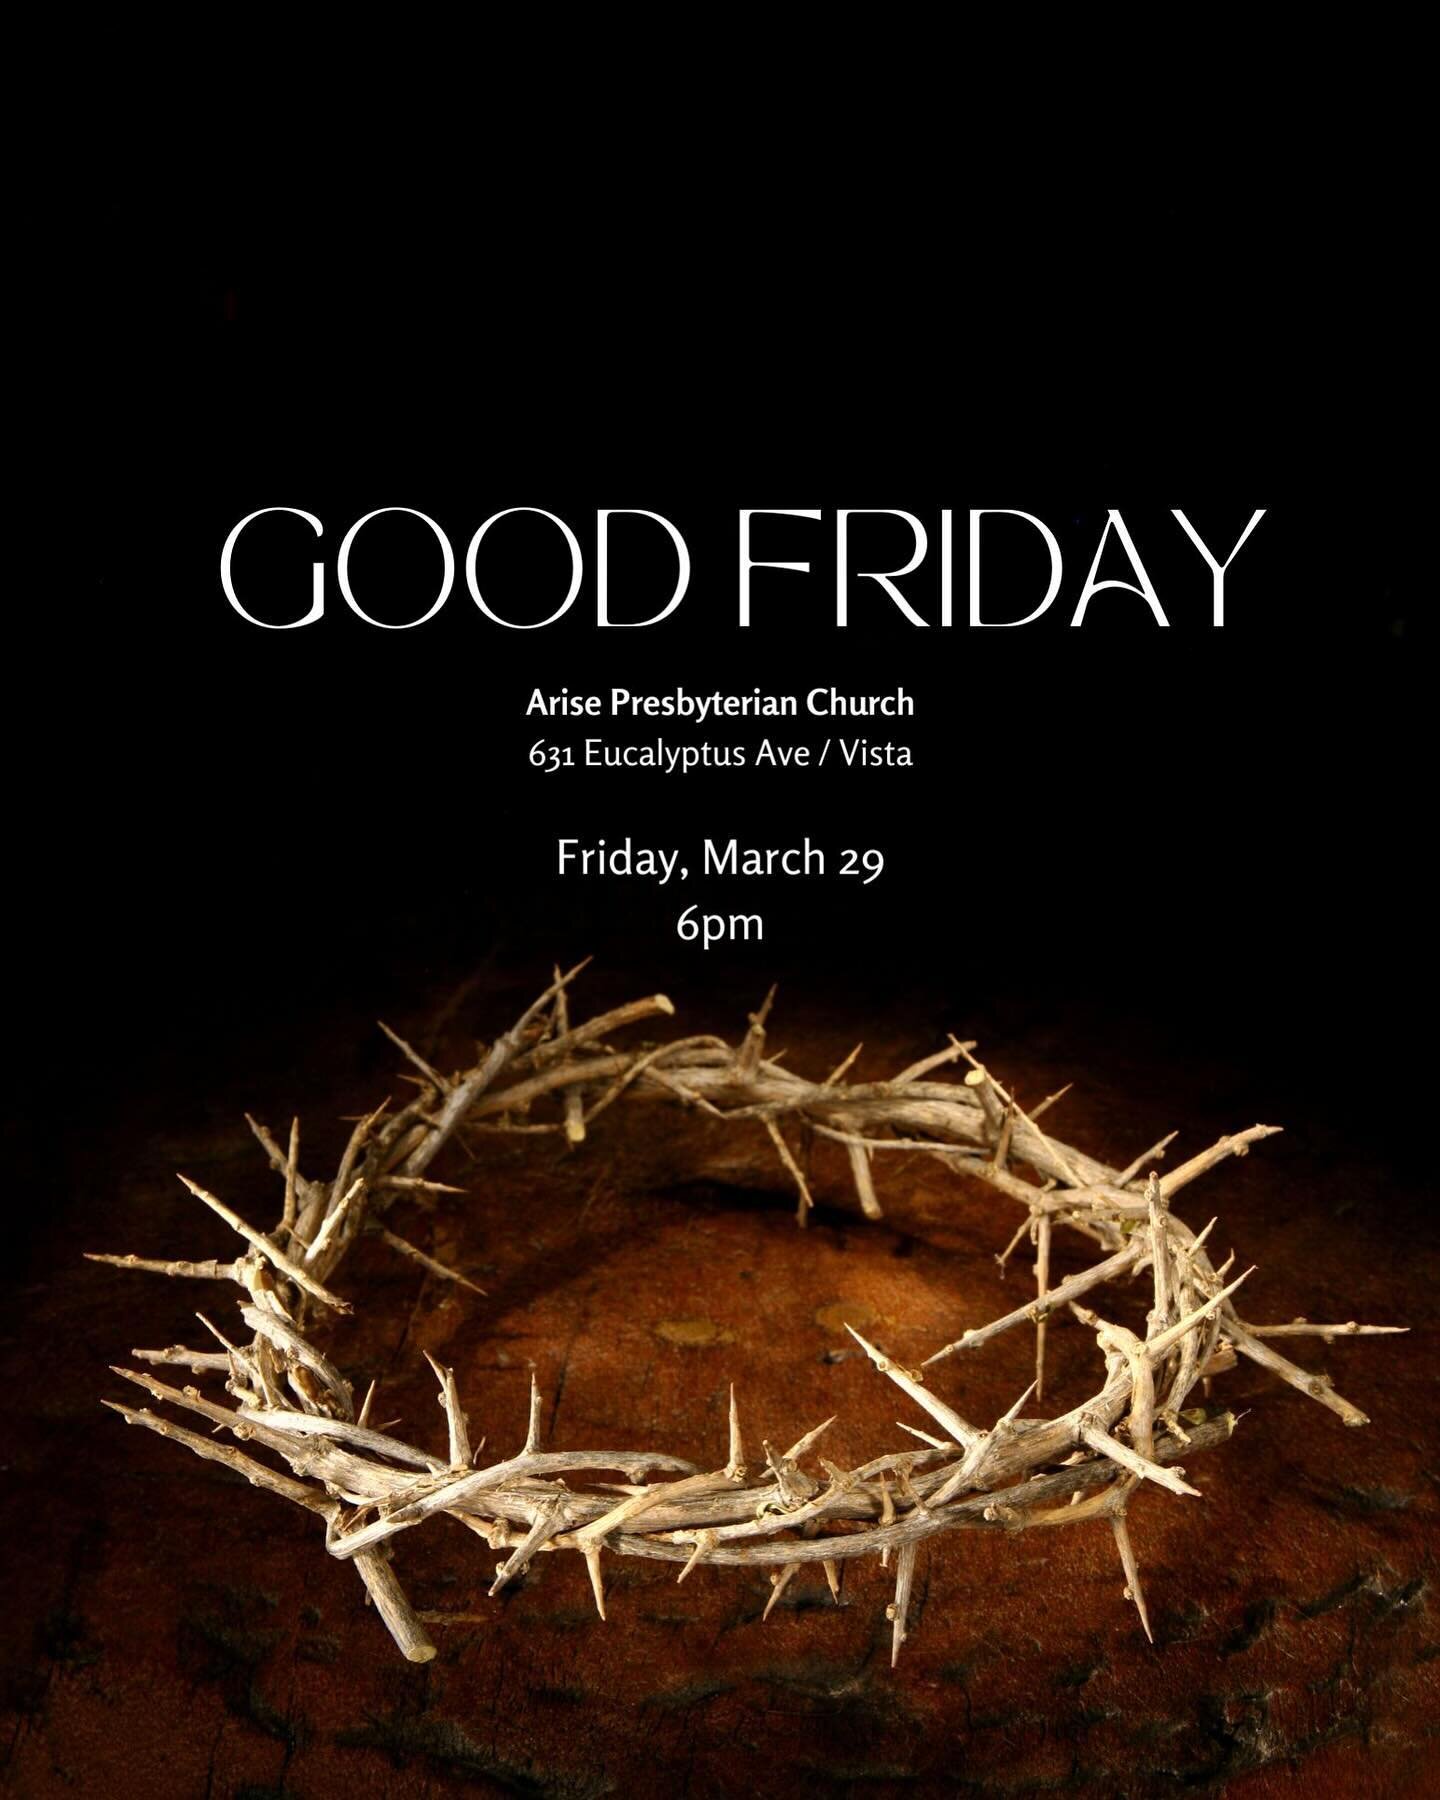 Join us at 6pm on Friday, March 29 as we prepare our hearts and minds for the fullness of the story of Jesus&rsquo;s ultimate sacrifice. 

No reservation required and friends and family are welcome! 

If you&rsquo;ve never been to a &ldquo;Good Frida